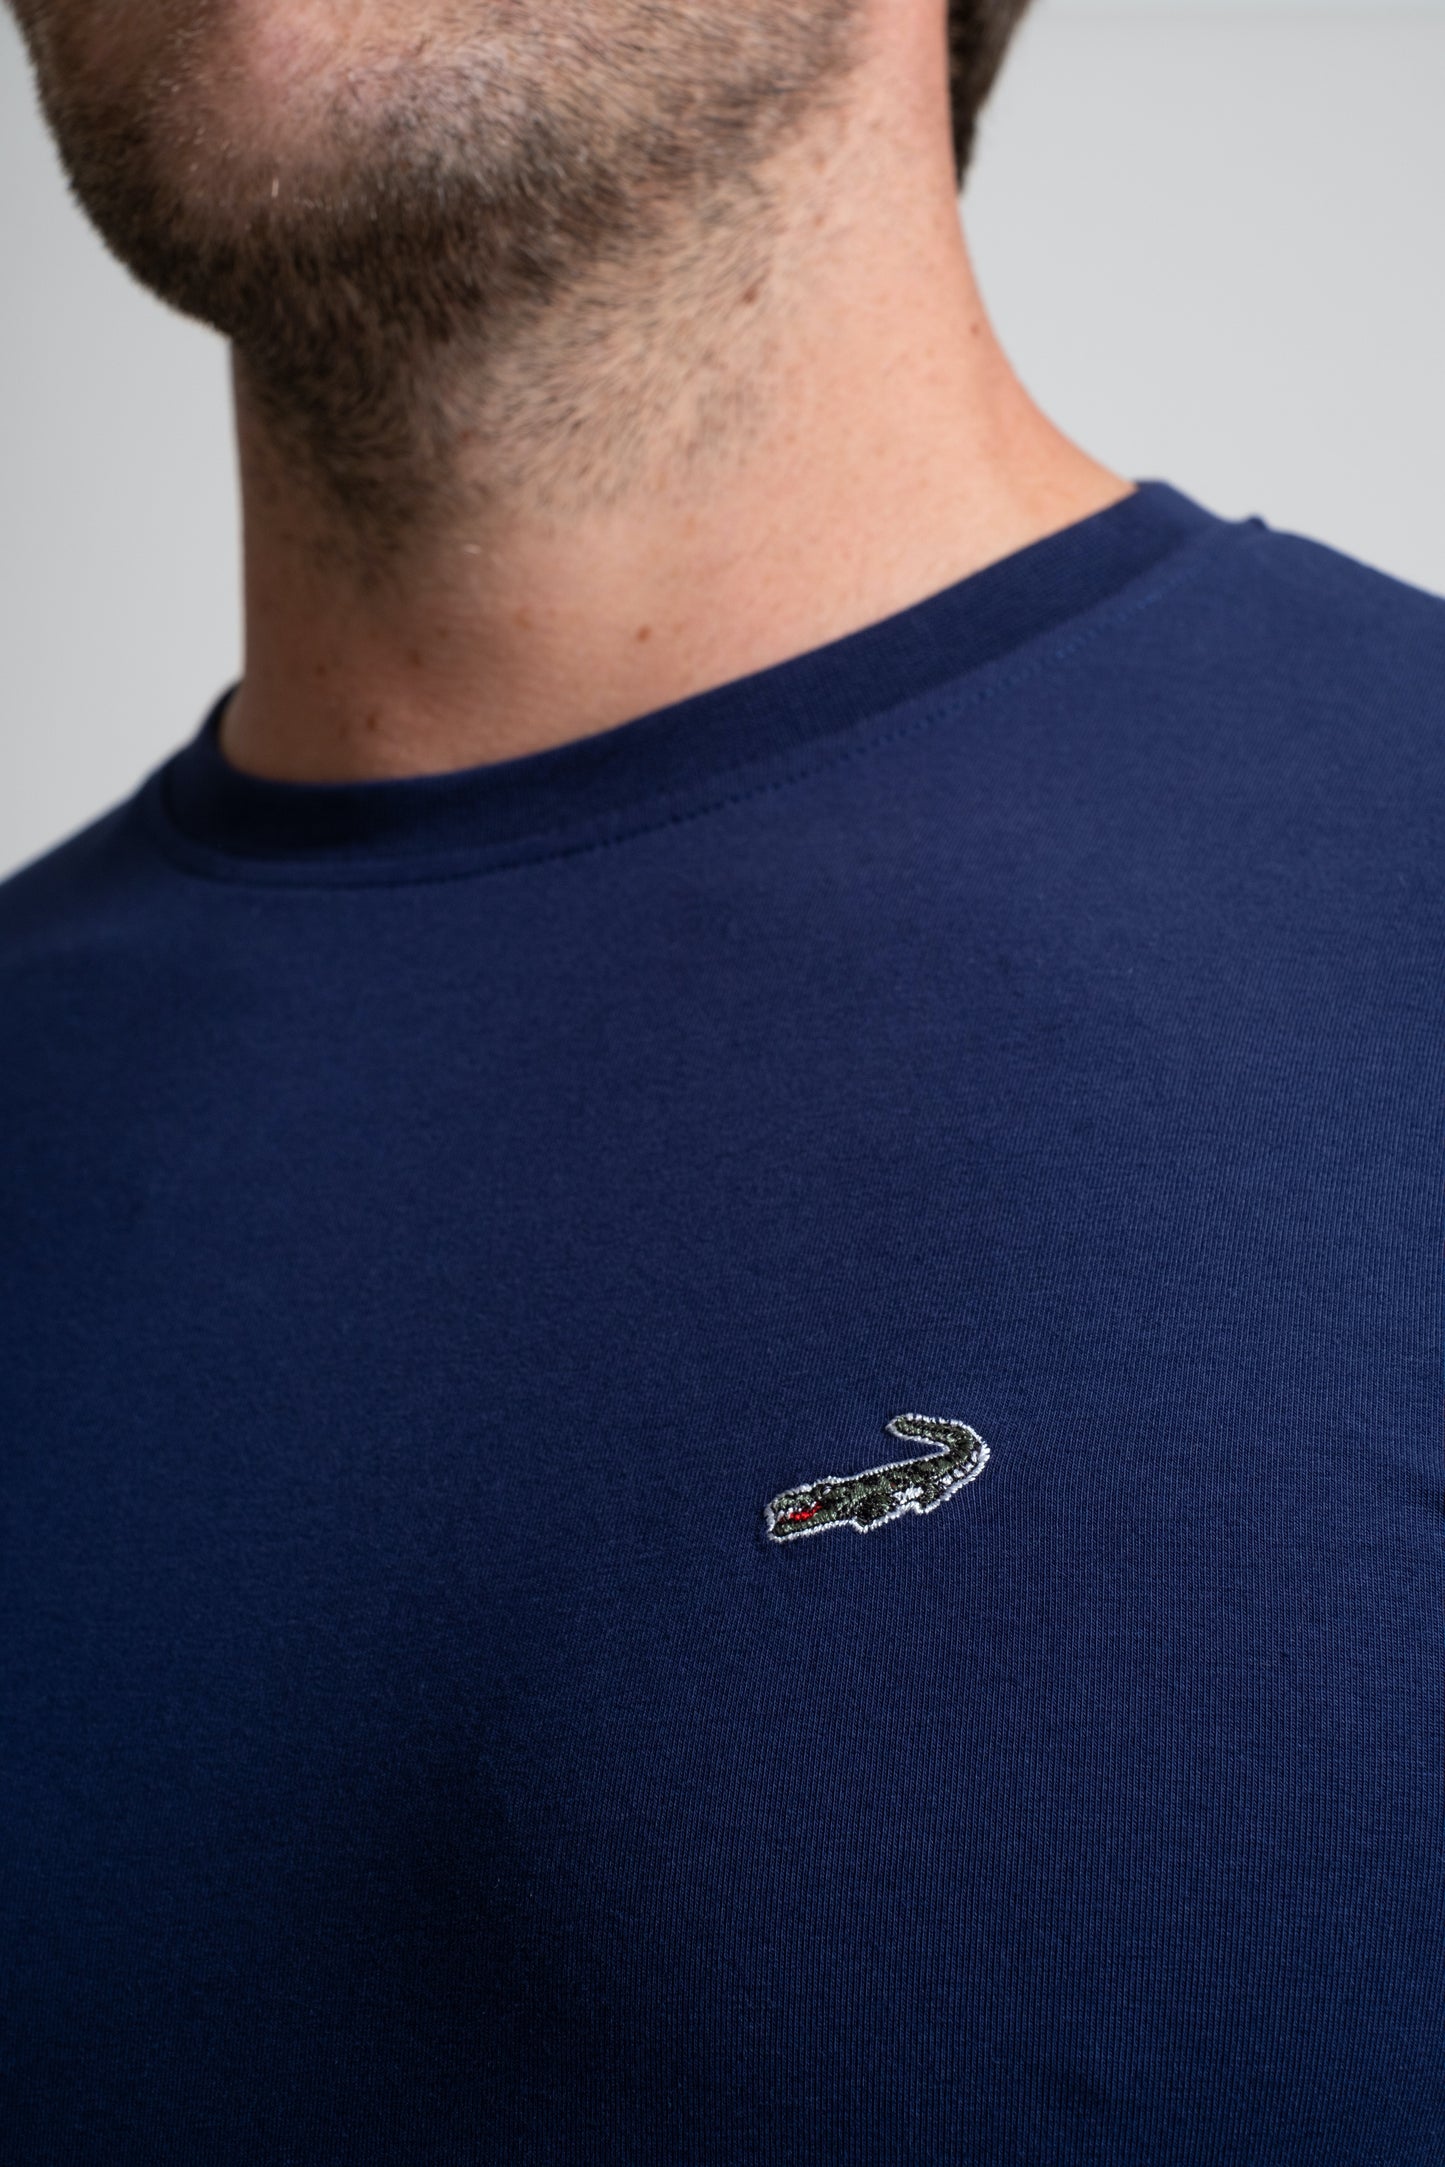 Action Fit Short sleeves-CasualCrew Neck - Blue Depths